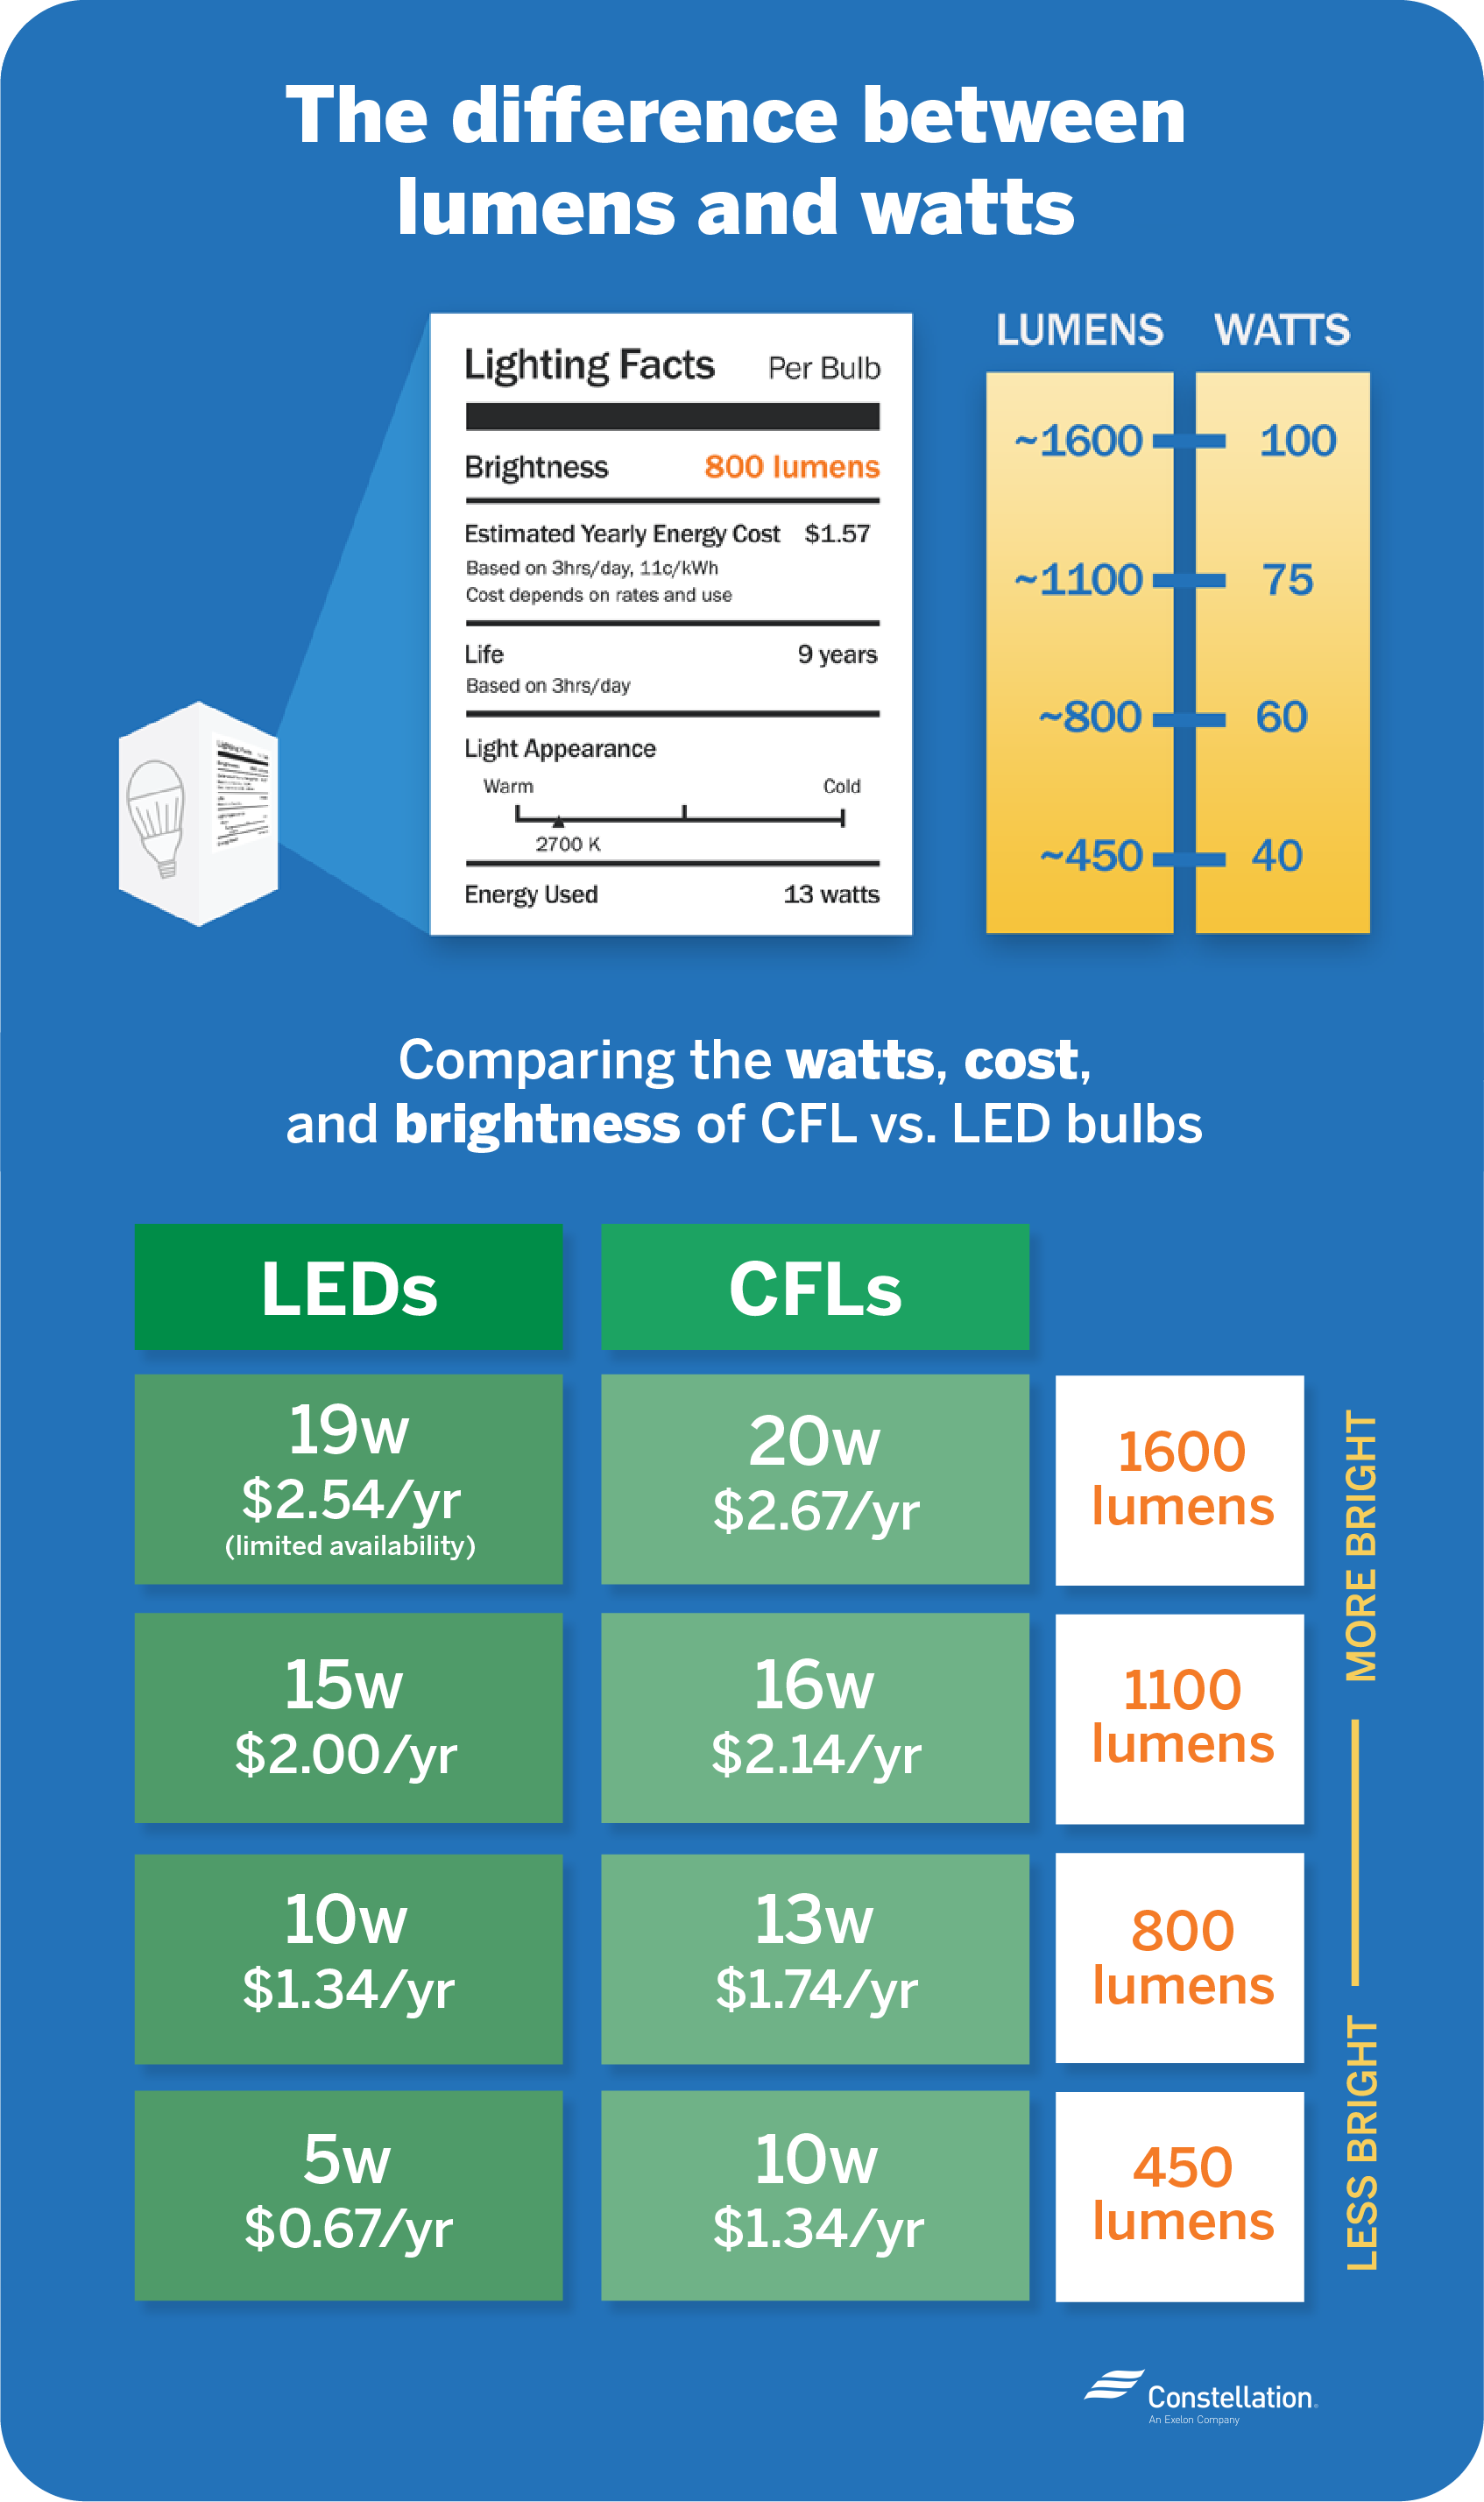 The difference between lumens and watts